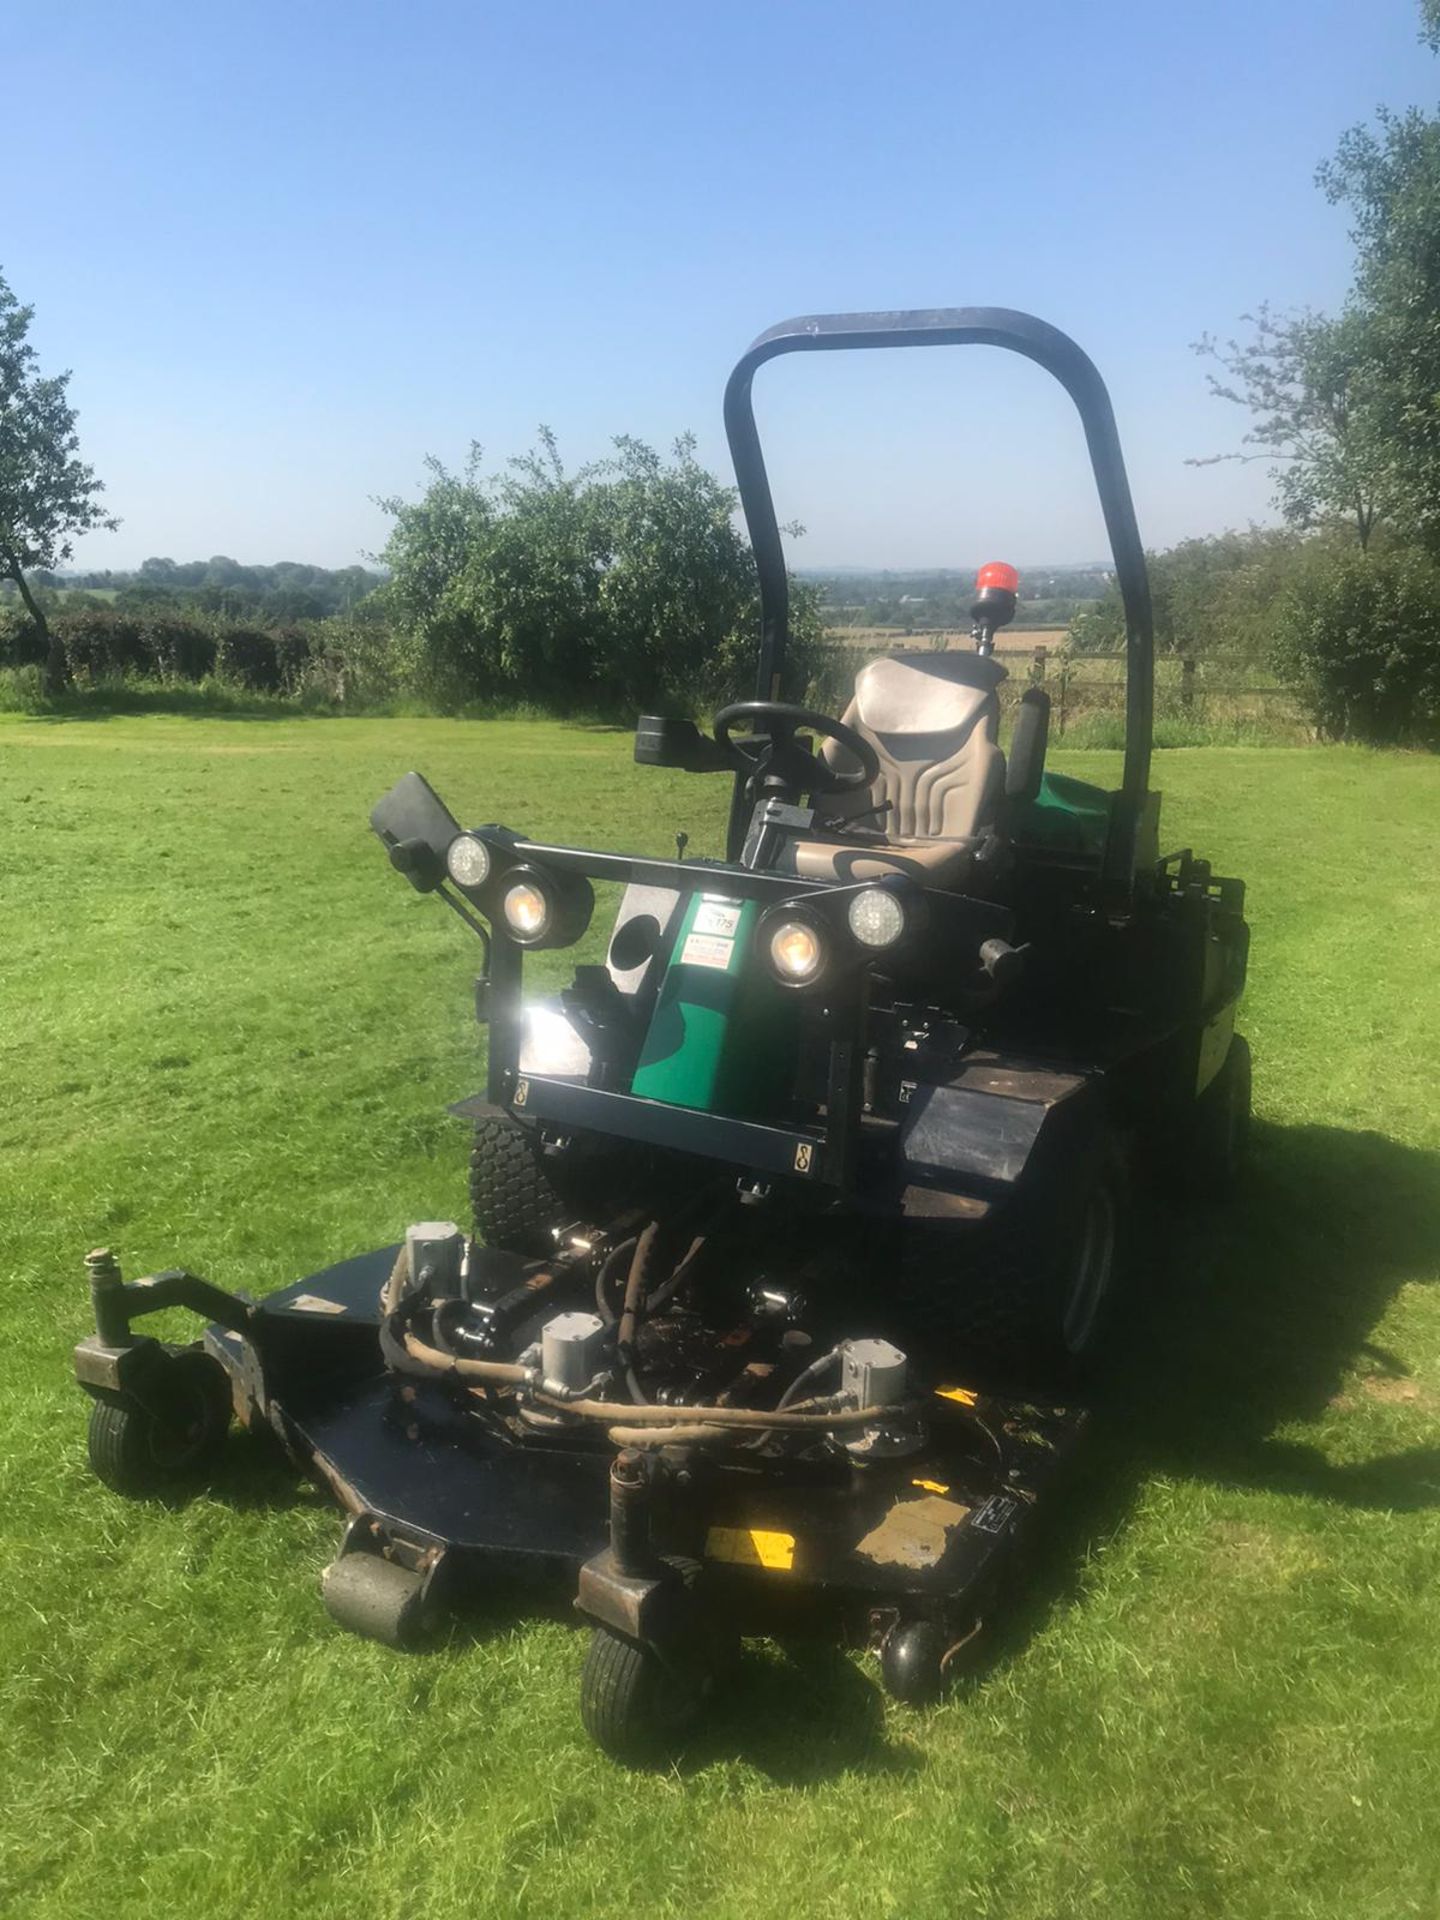 2010/10 REG RANSOMES HR 3300T OUTFRONT MOWER, RUNS, DRIVES AND CUTS *PLUS VAT* - Image 2 of 4